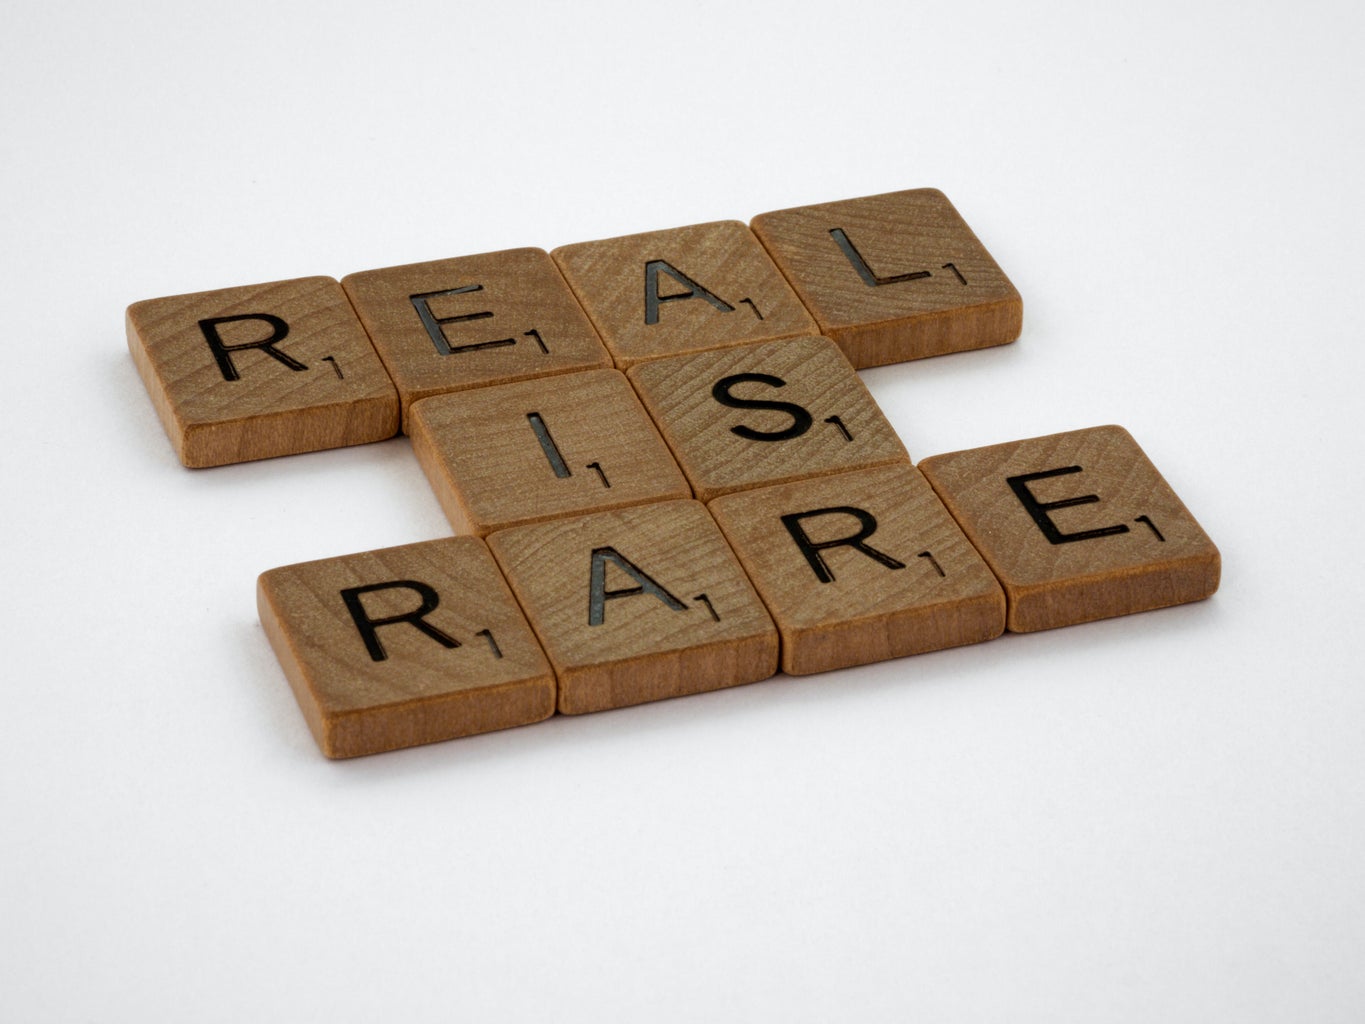 \'real is rare\' scrabble tiles